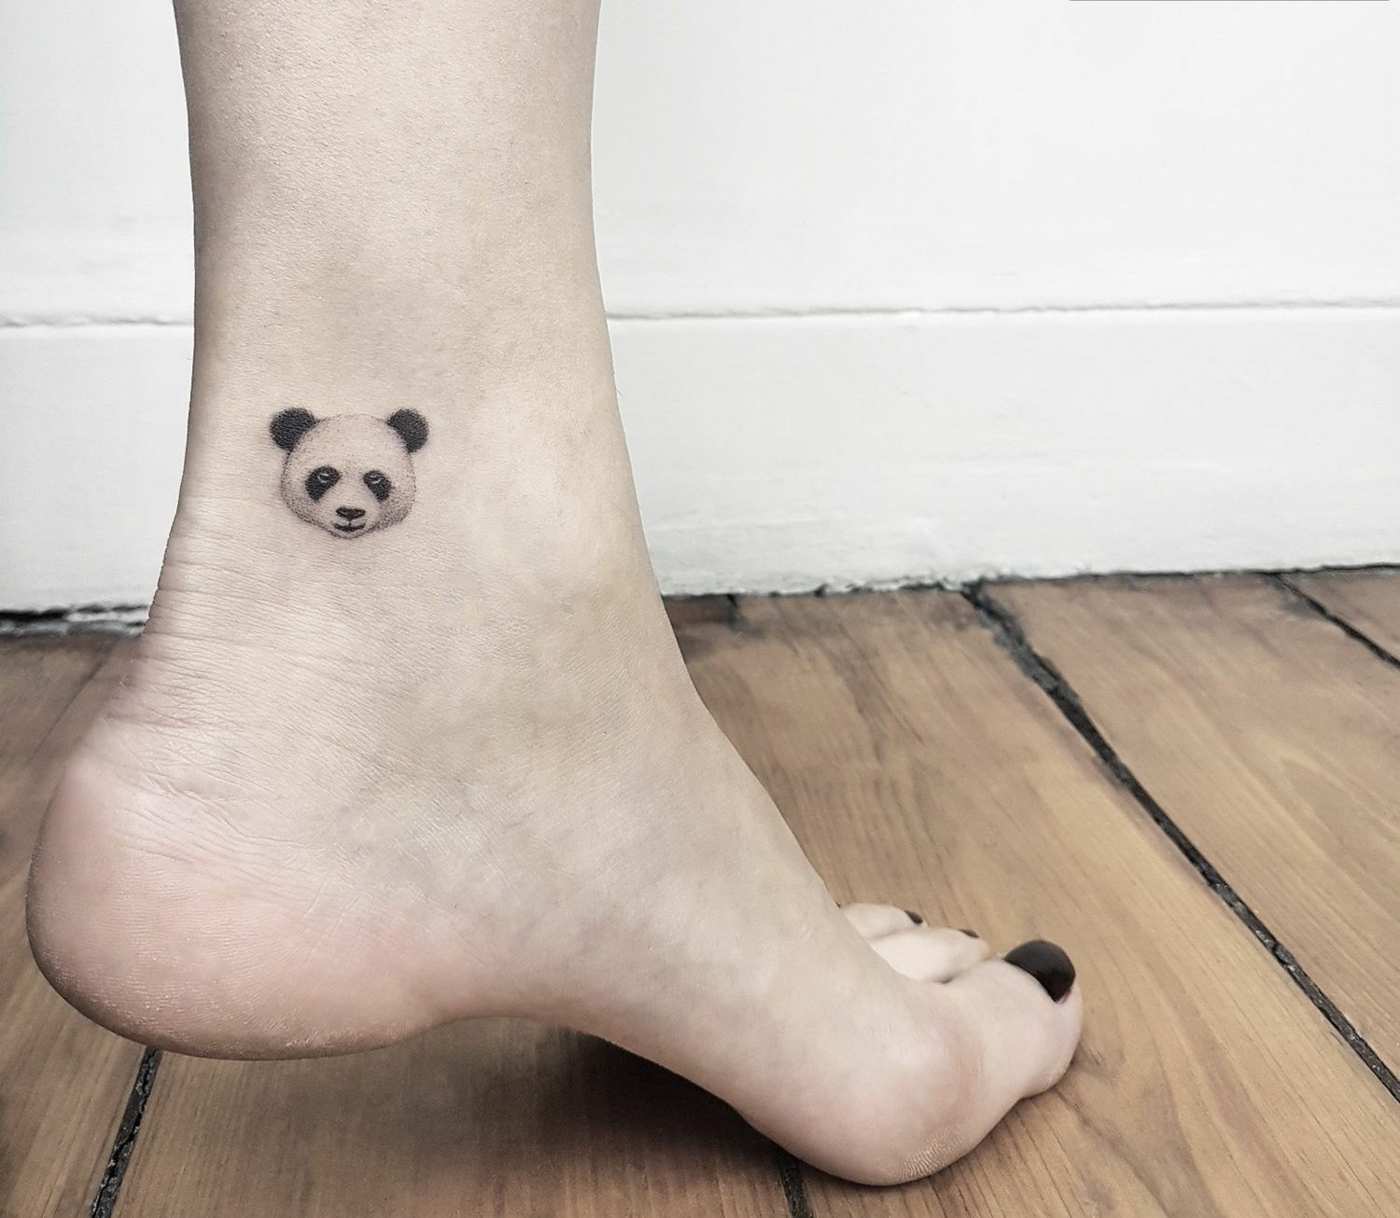 Fill Tattoo in Small Format with Panda Copy in Black and White